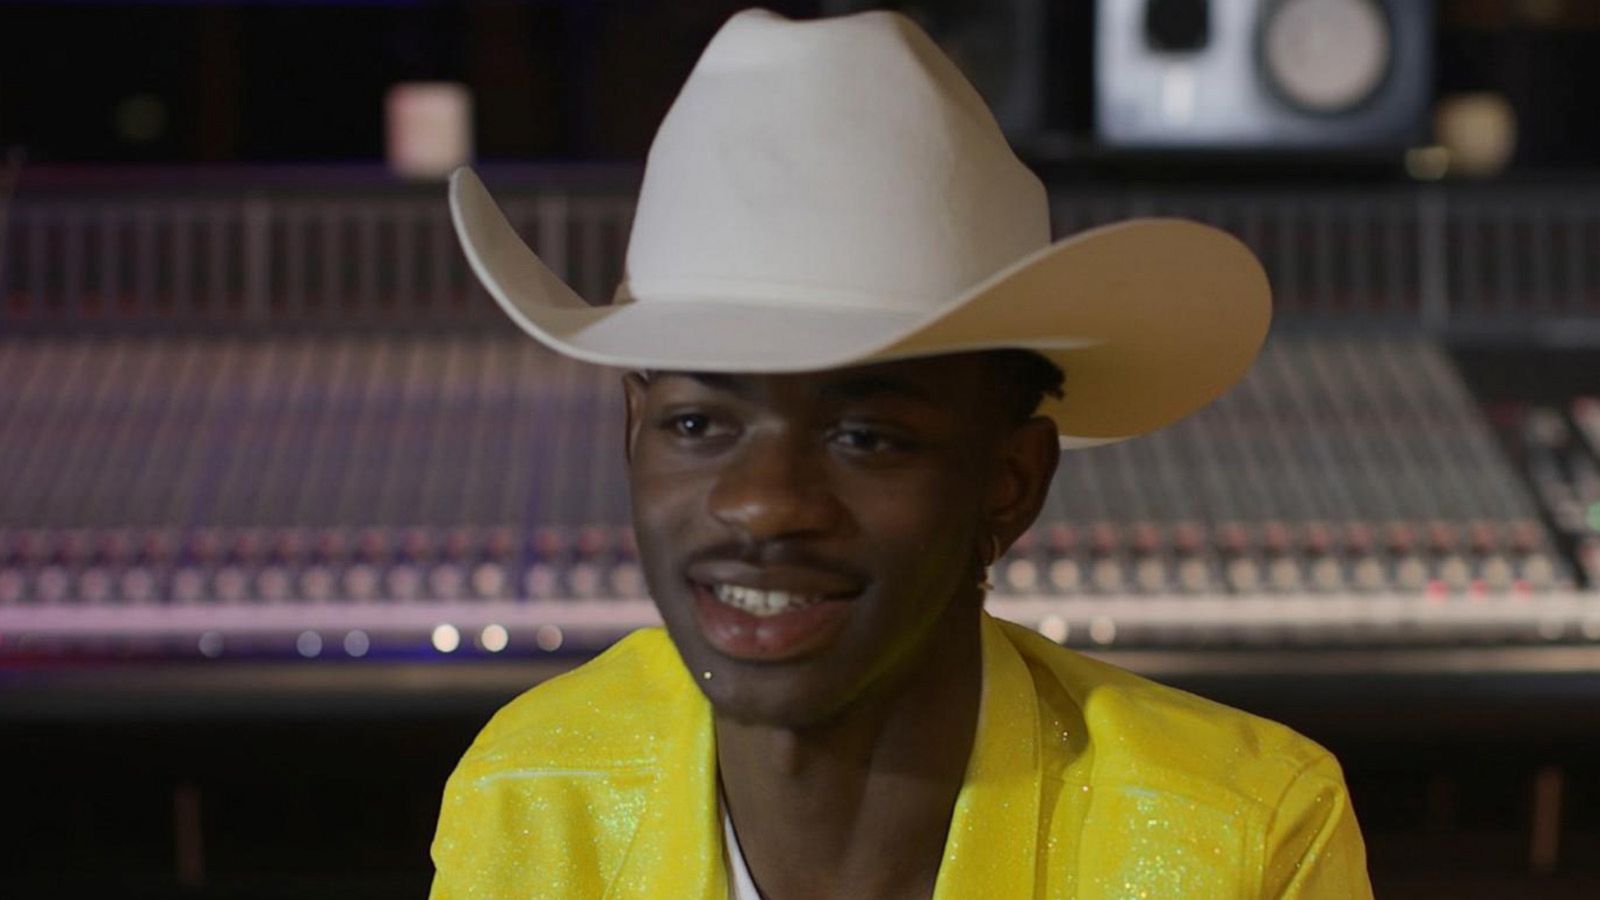 Lil nas x old Town Road. Лил нас Икс Олд Таун роад. Lil old time Road. Old Town Road Lil nas.